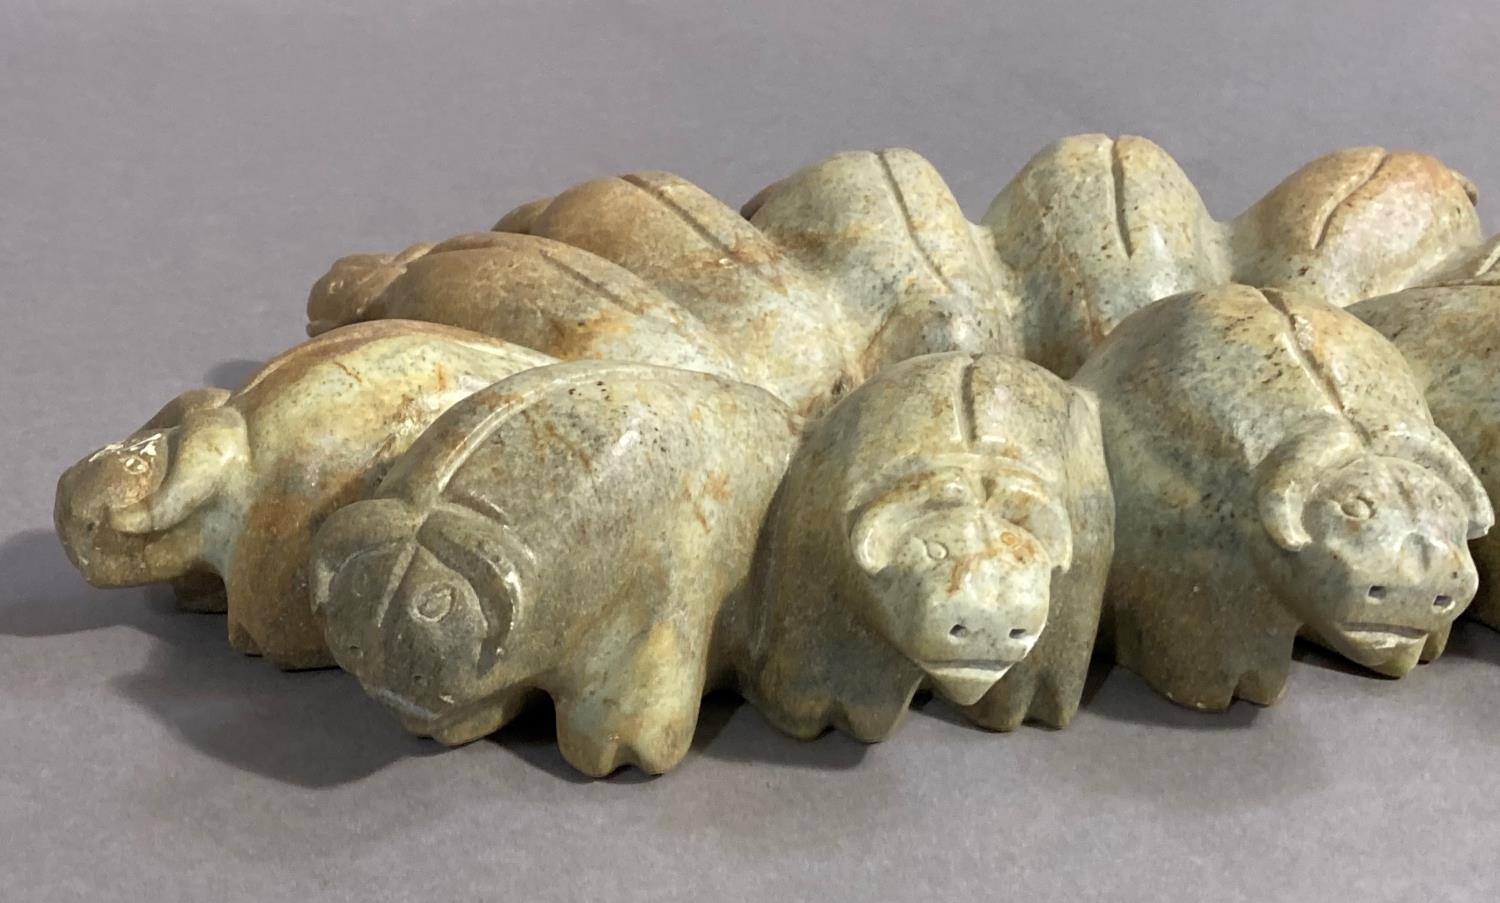 Inuit Carving - Musk Ox Circle by Johanasie Faber 2002, rare carving of twelve musk oxen in the - Image 11 of 11